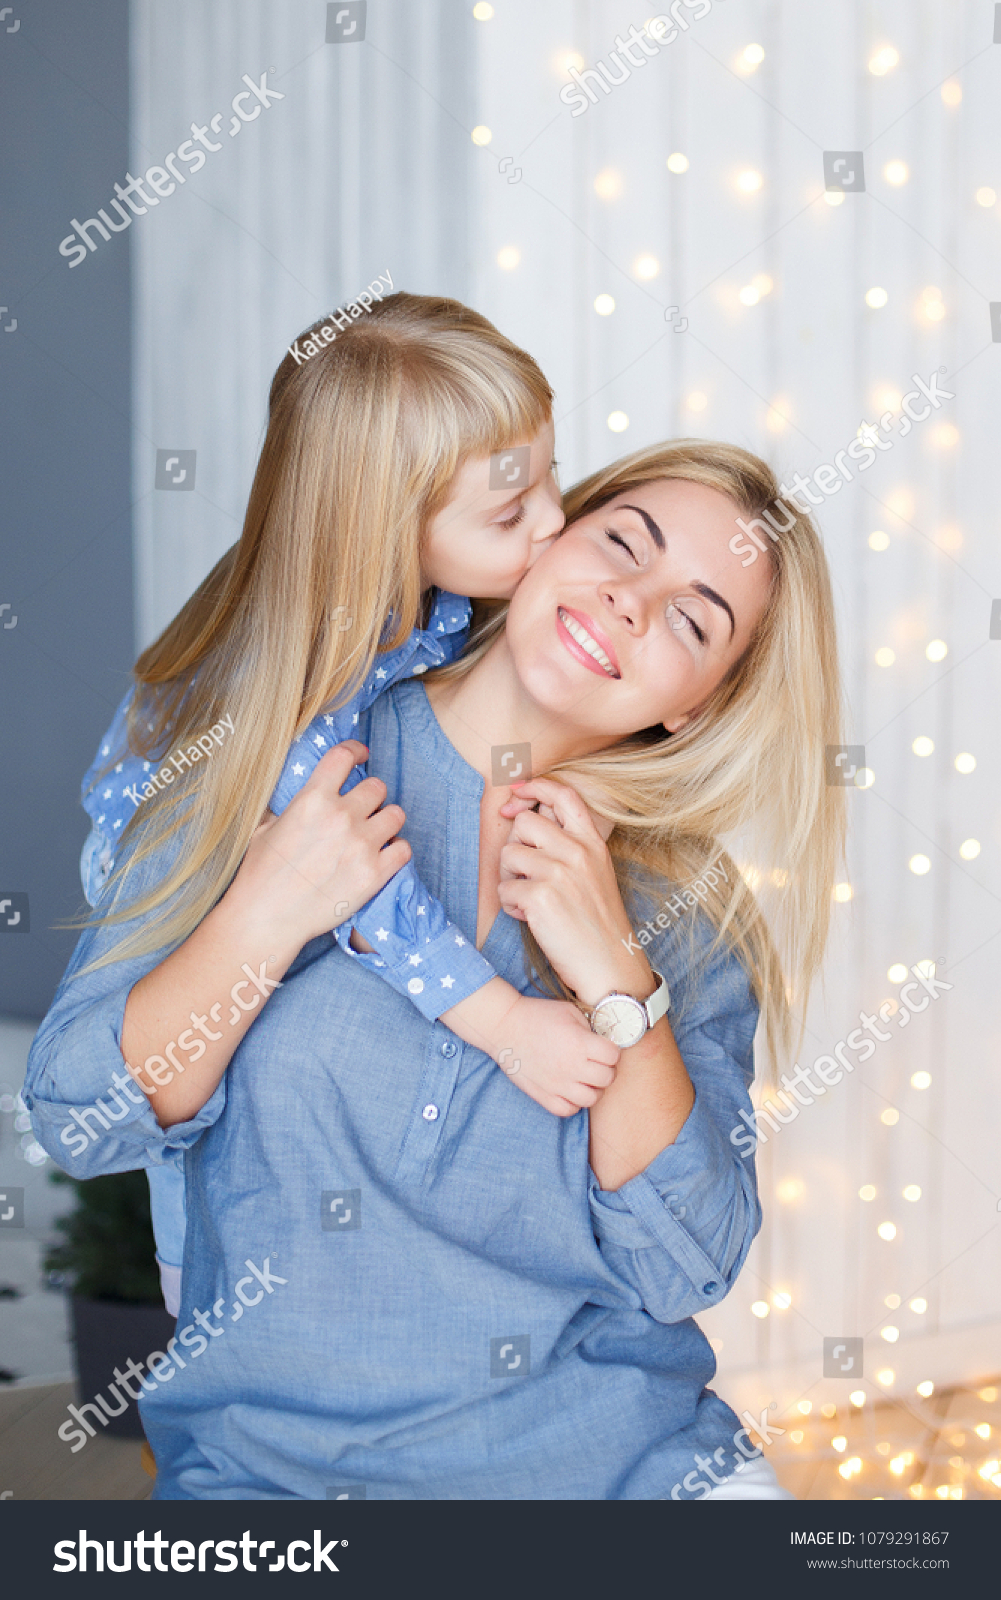 claudia coffey recommends mom and daughter kissing pic